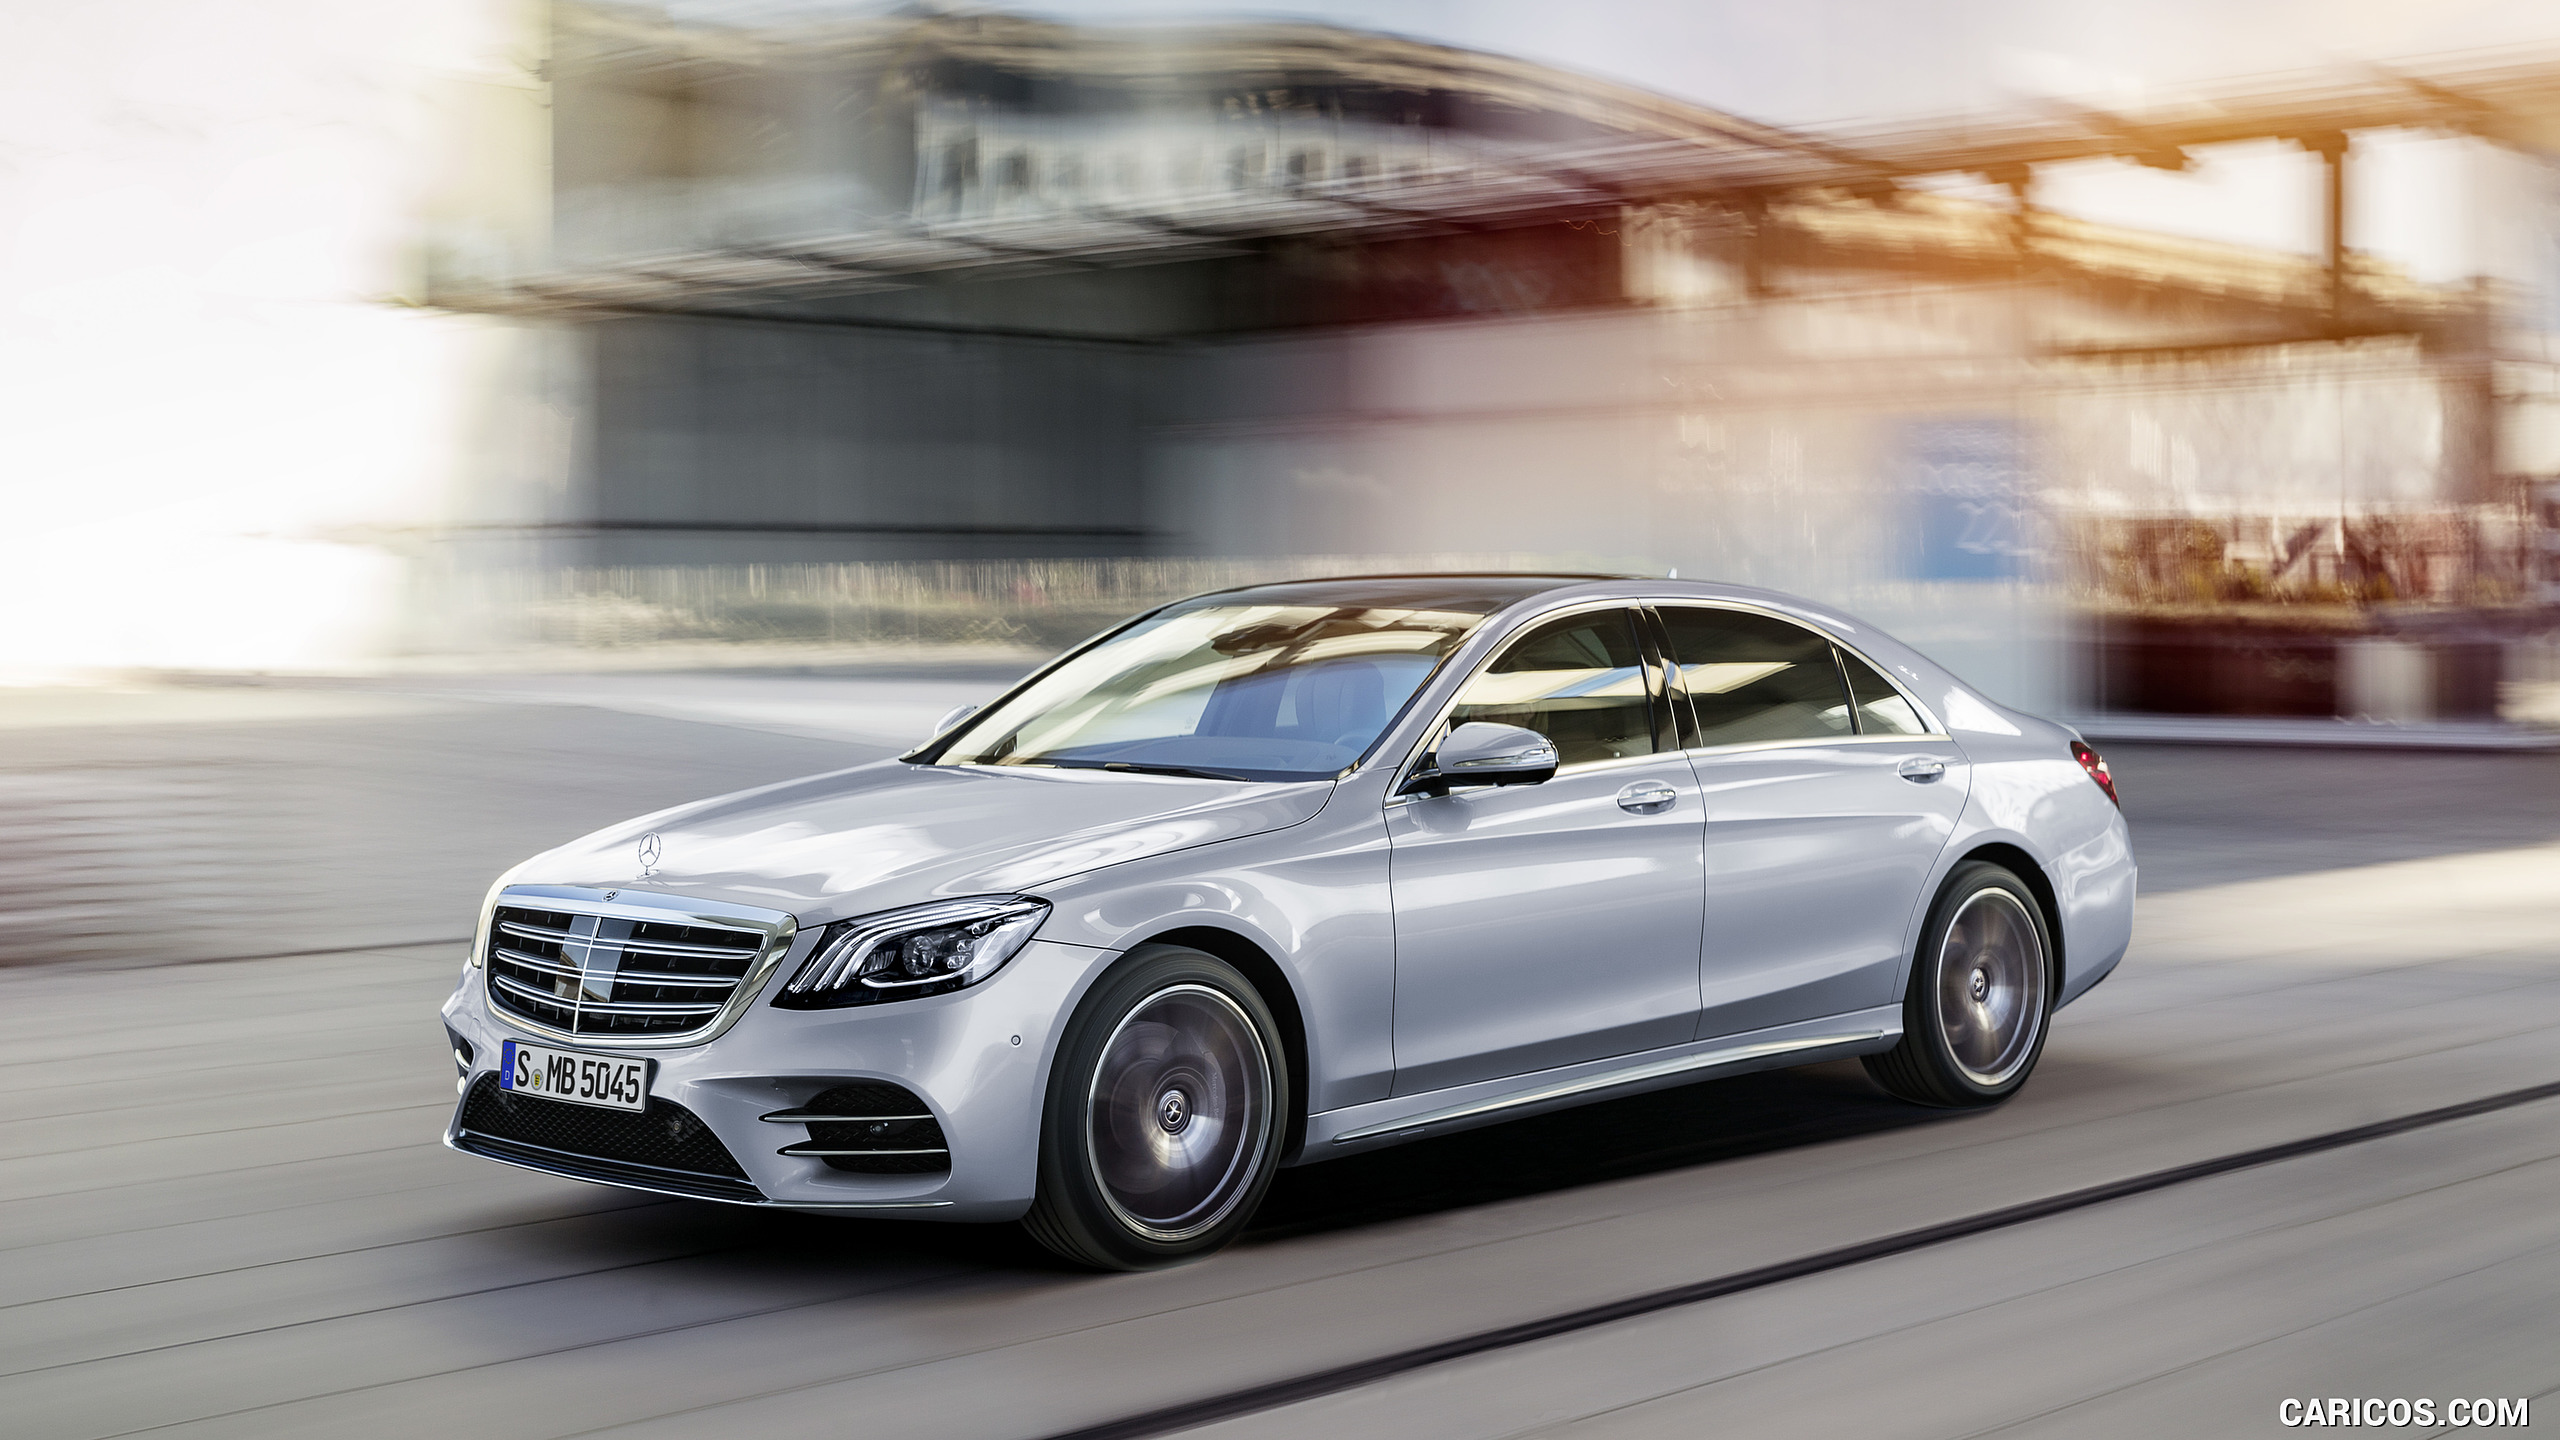 2018 Mercedes-Benz S-Class AMG Line LWB (Color: Diamond Silver), #1 of 156